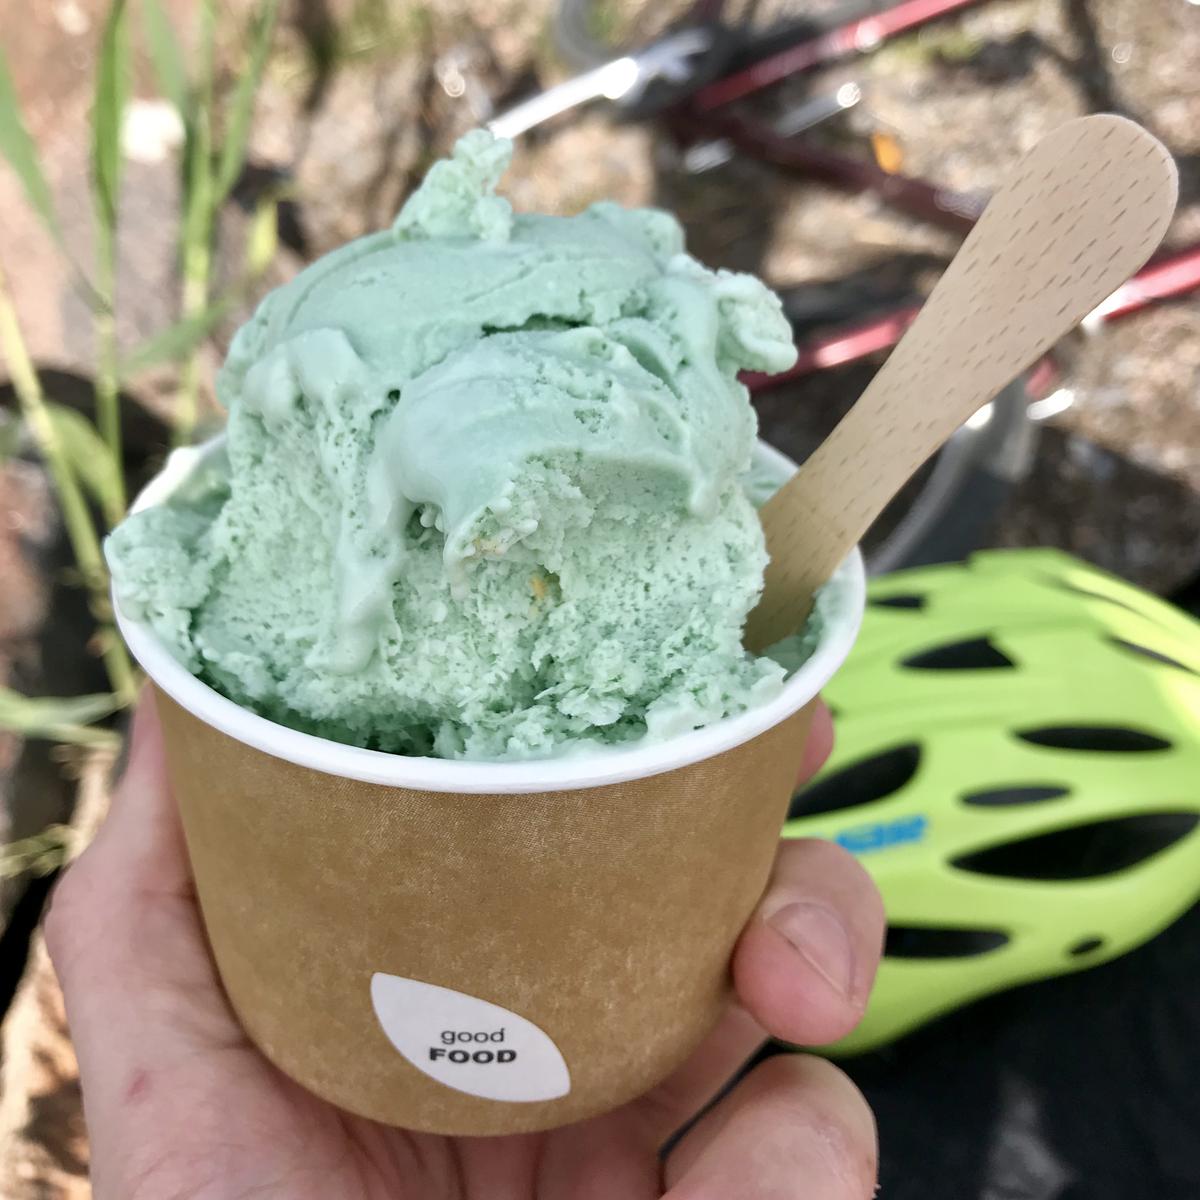 A portion of green ice cream in a cup.